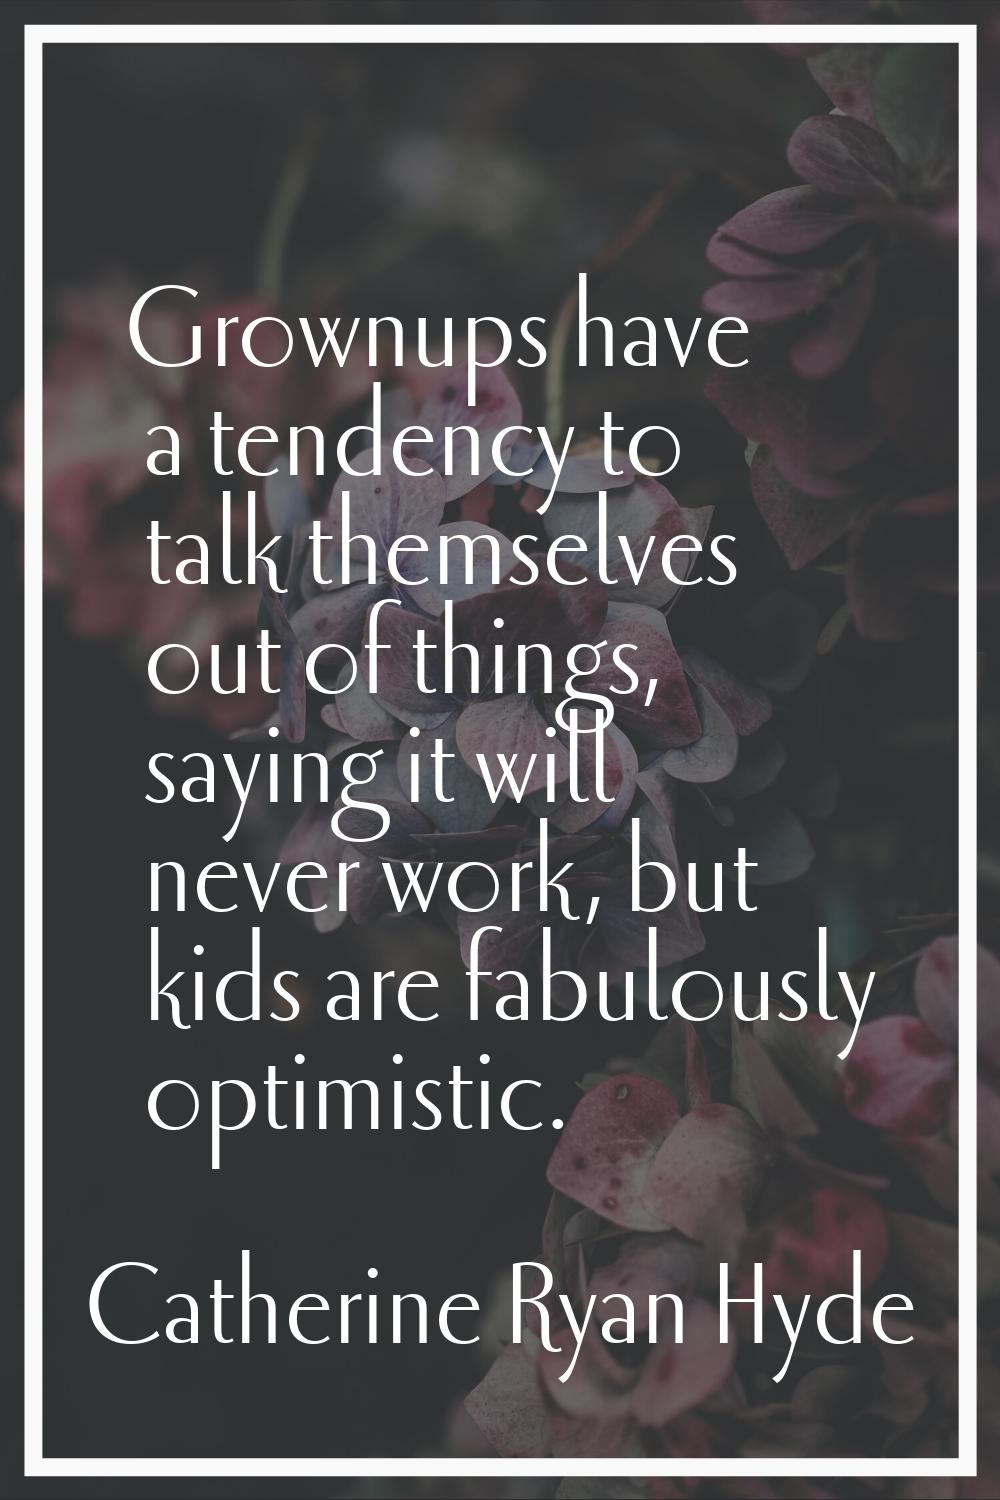 Grownups have a tendency to talk themselves out of things, saying it will never work, but kids are 